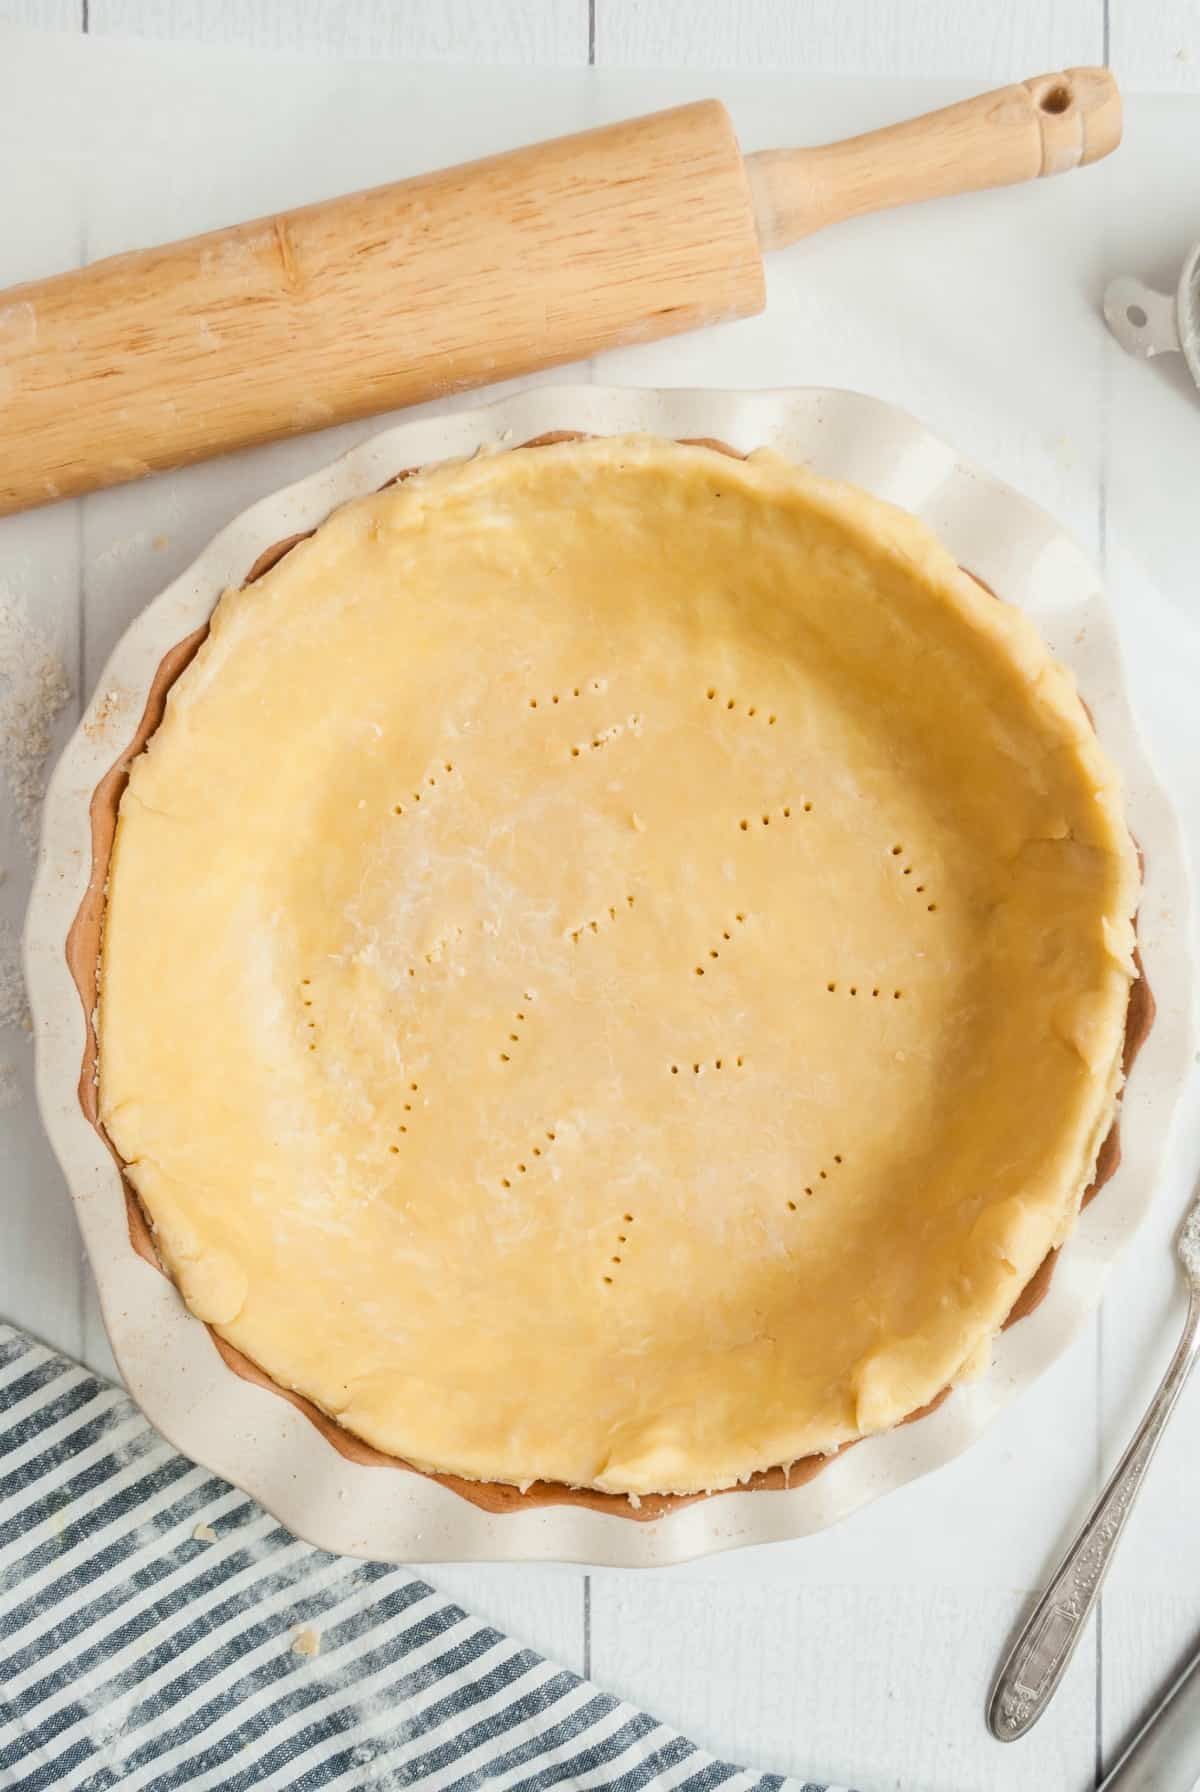 Homemade pie crust in a pie plate before baking with a rolling pin in background.